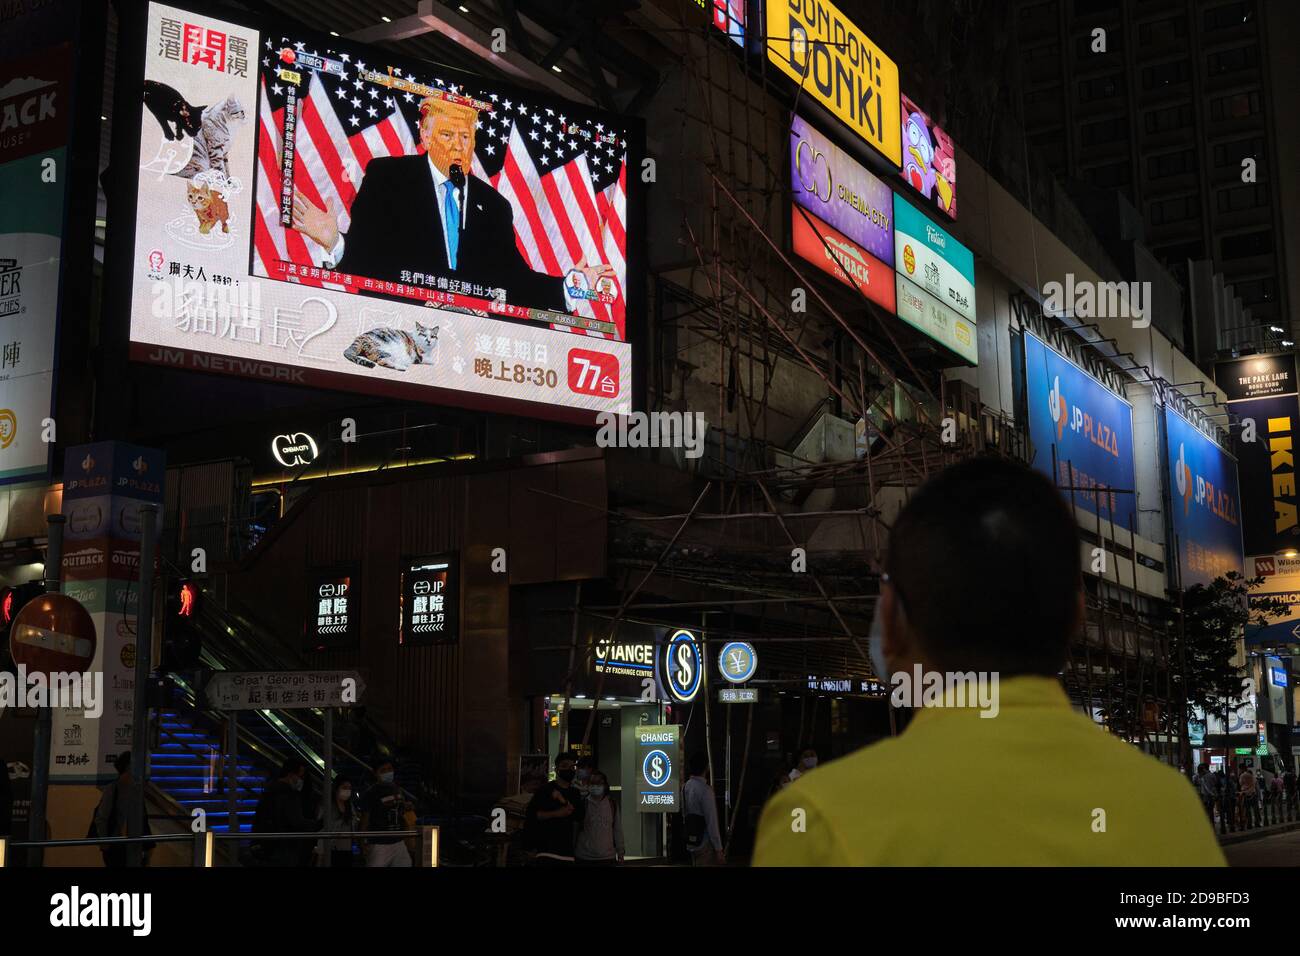 A man watches the Republican candidate Donald Trump speaking on a large screen broadcasting the live news report of the US Presidential election. Stock Photo